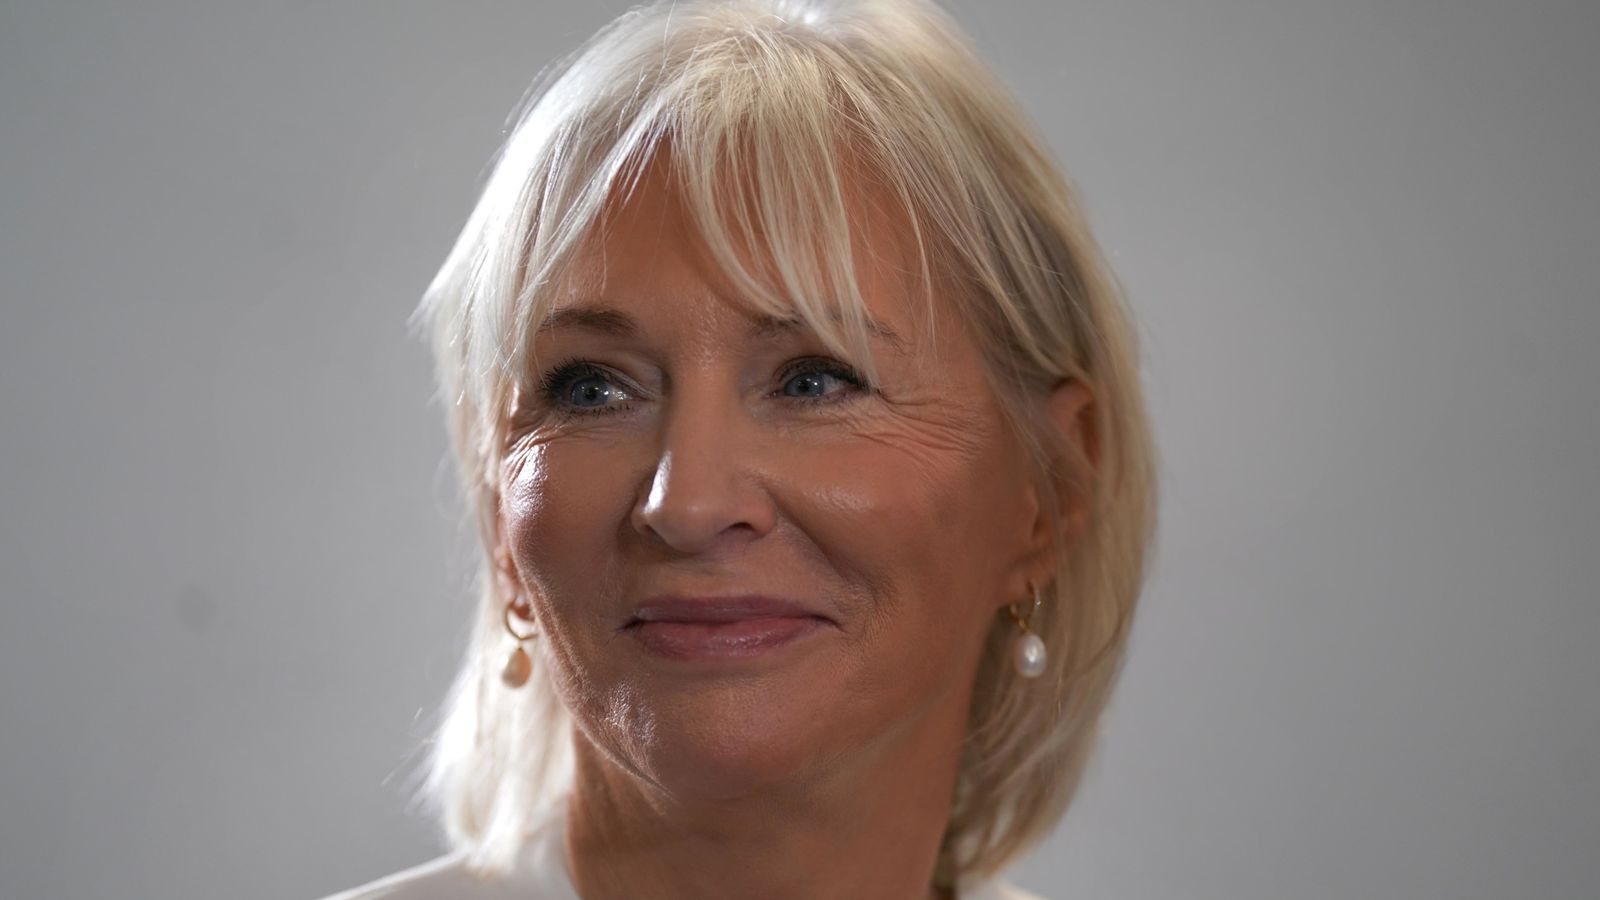 Nadine Dorries faces questions over claims she sent 'forceful communications' to civil servants after peerages snub